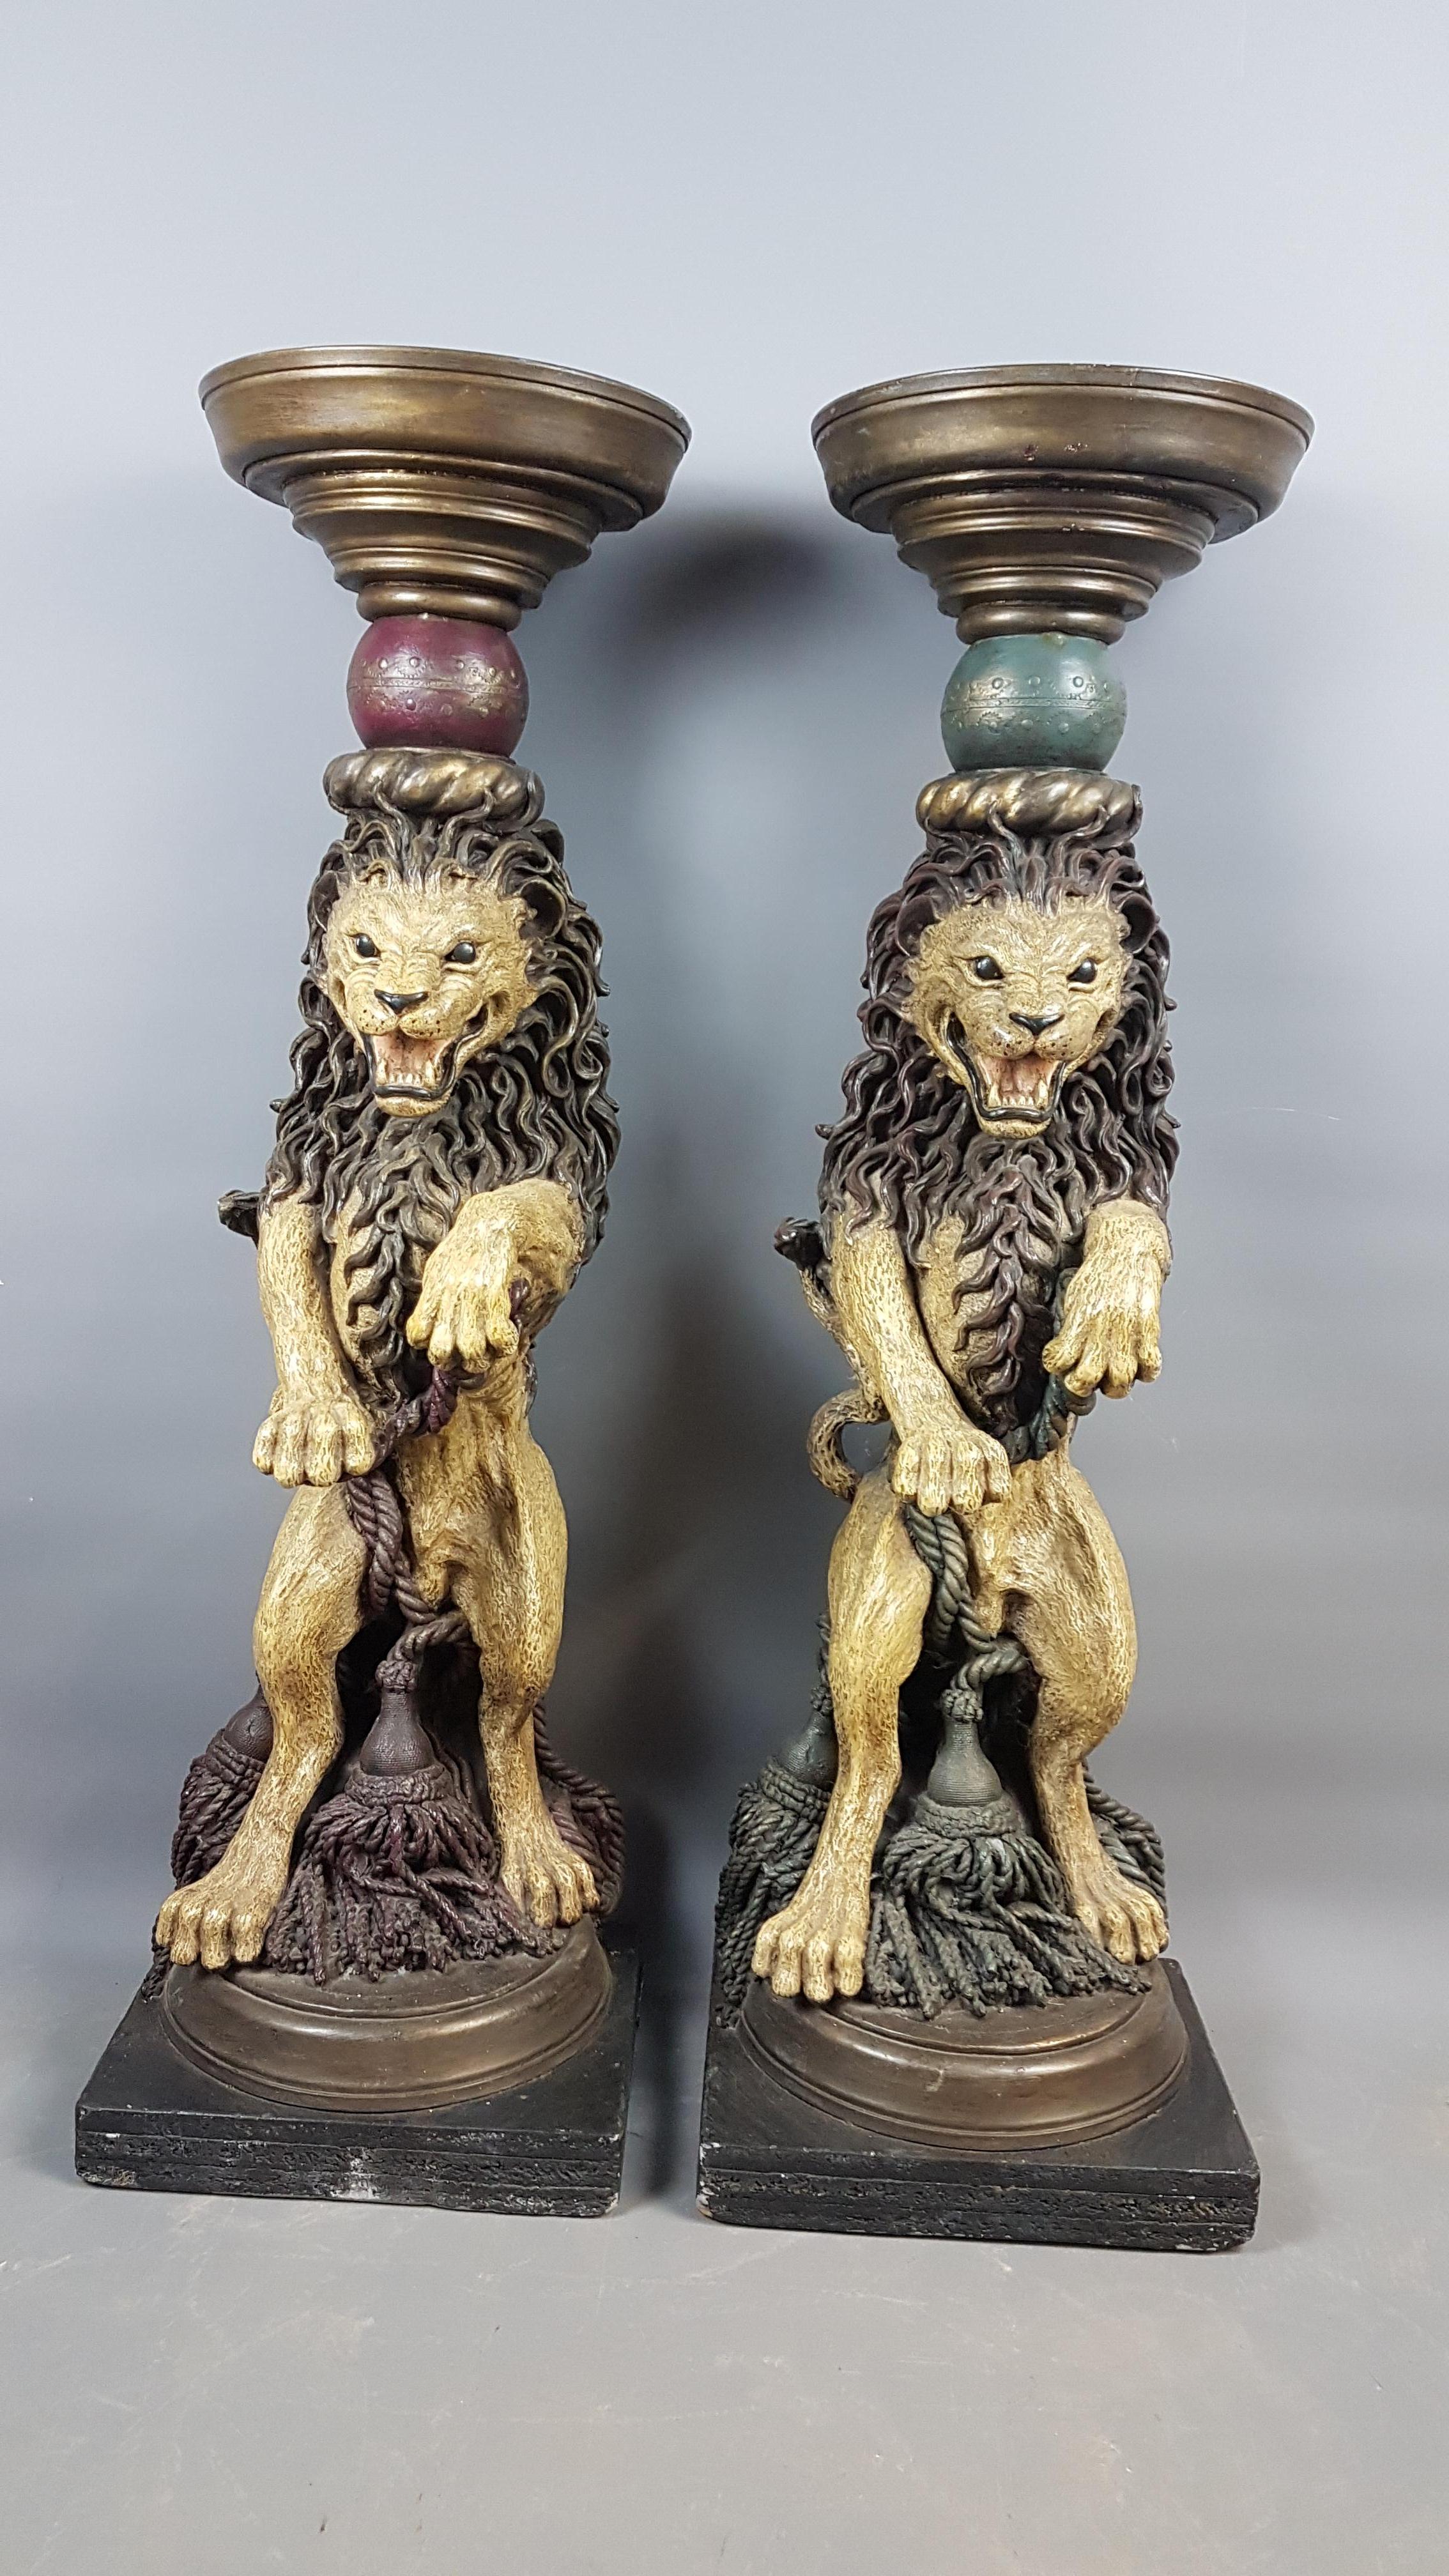 A superbly decorative pair of plaster/clay cast rampant lion hall stands/consoles that are painted. The casting quality of the these stands is exceptional. They are in very good condition with a few marks and knocks from use. Have previously been